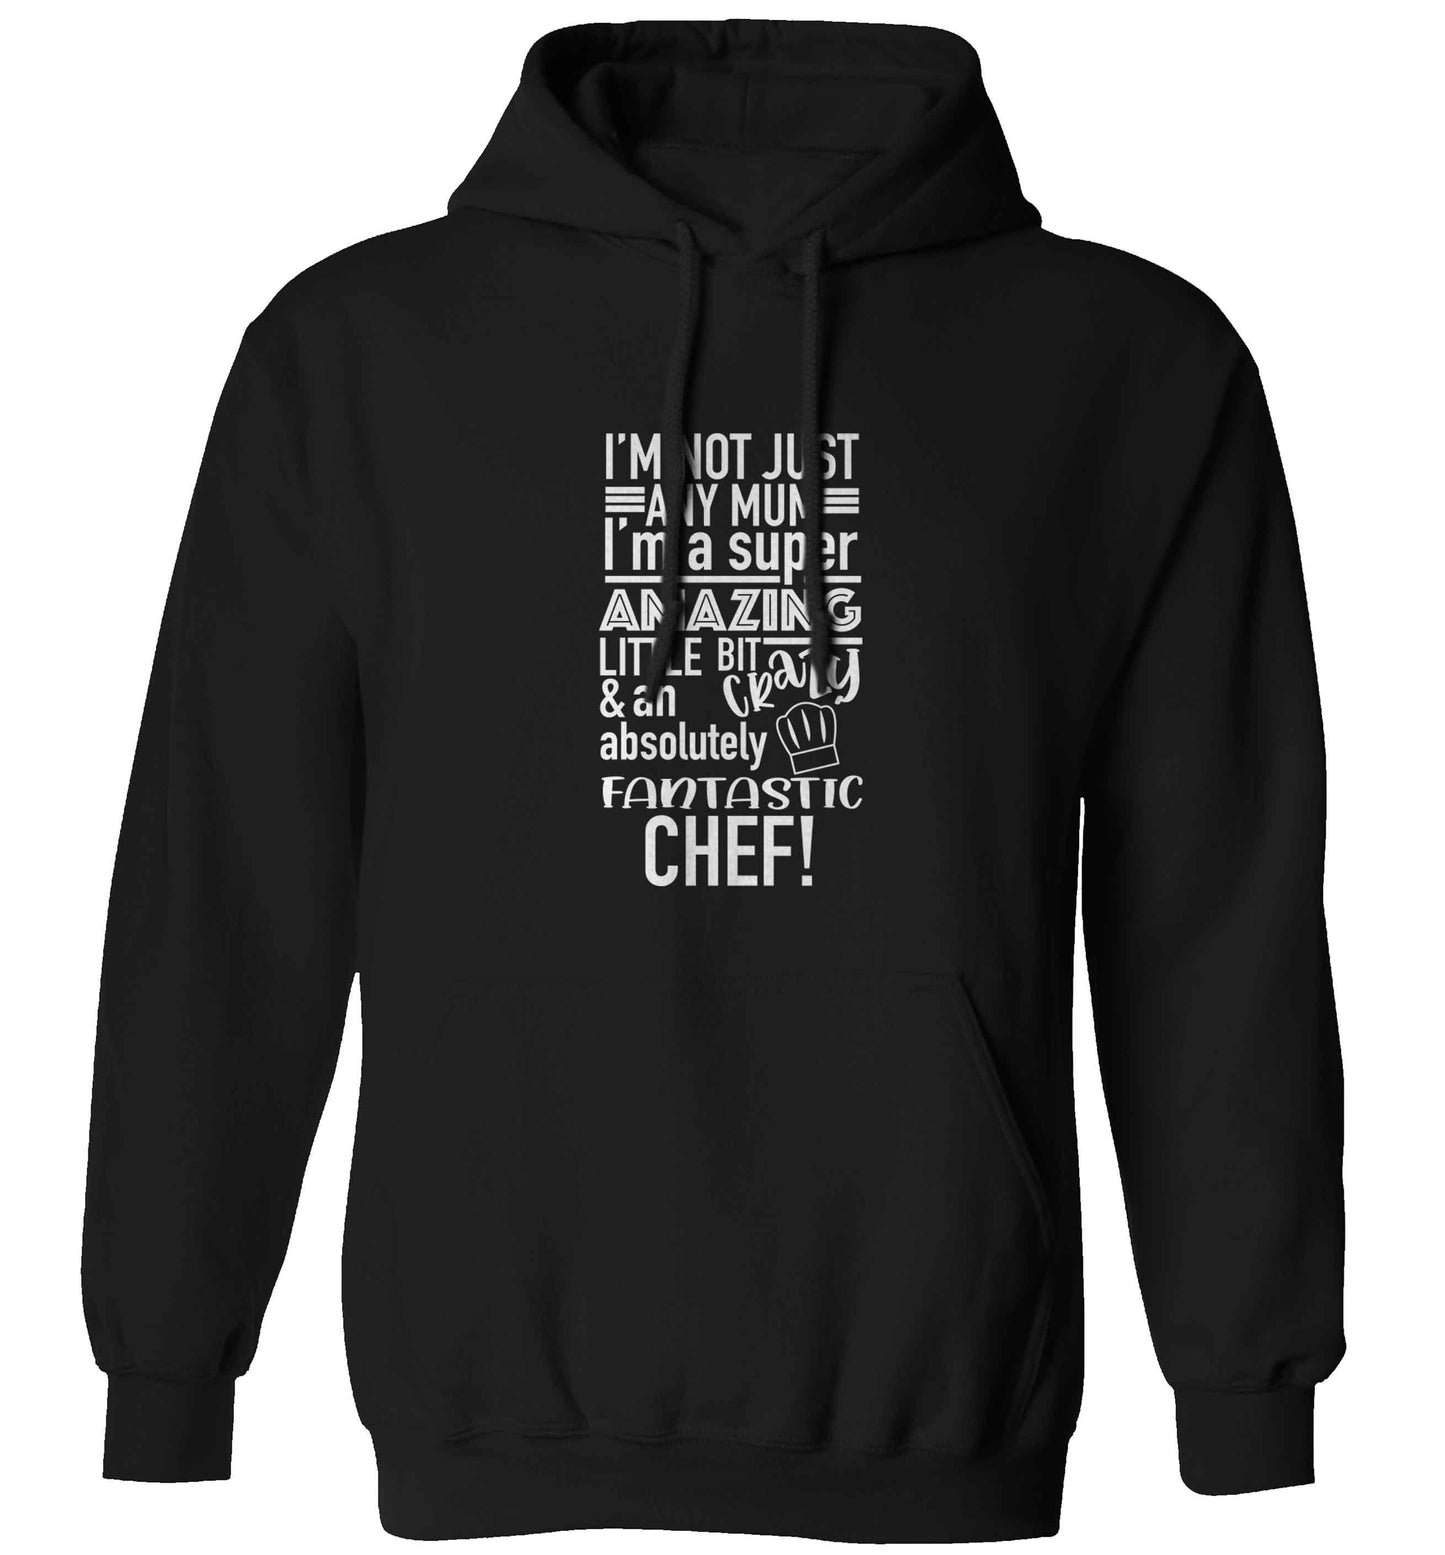 I'm not just any mum I'm a super amazing little bit crazy and an absolutely fantastic chef! adults unisex black hoodie 2XL